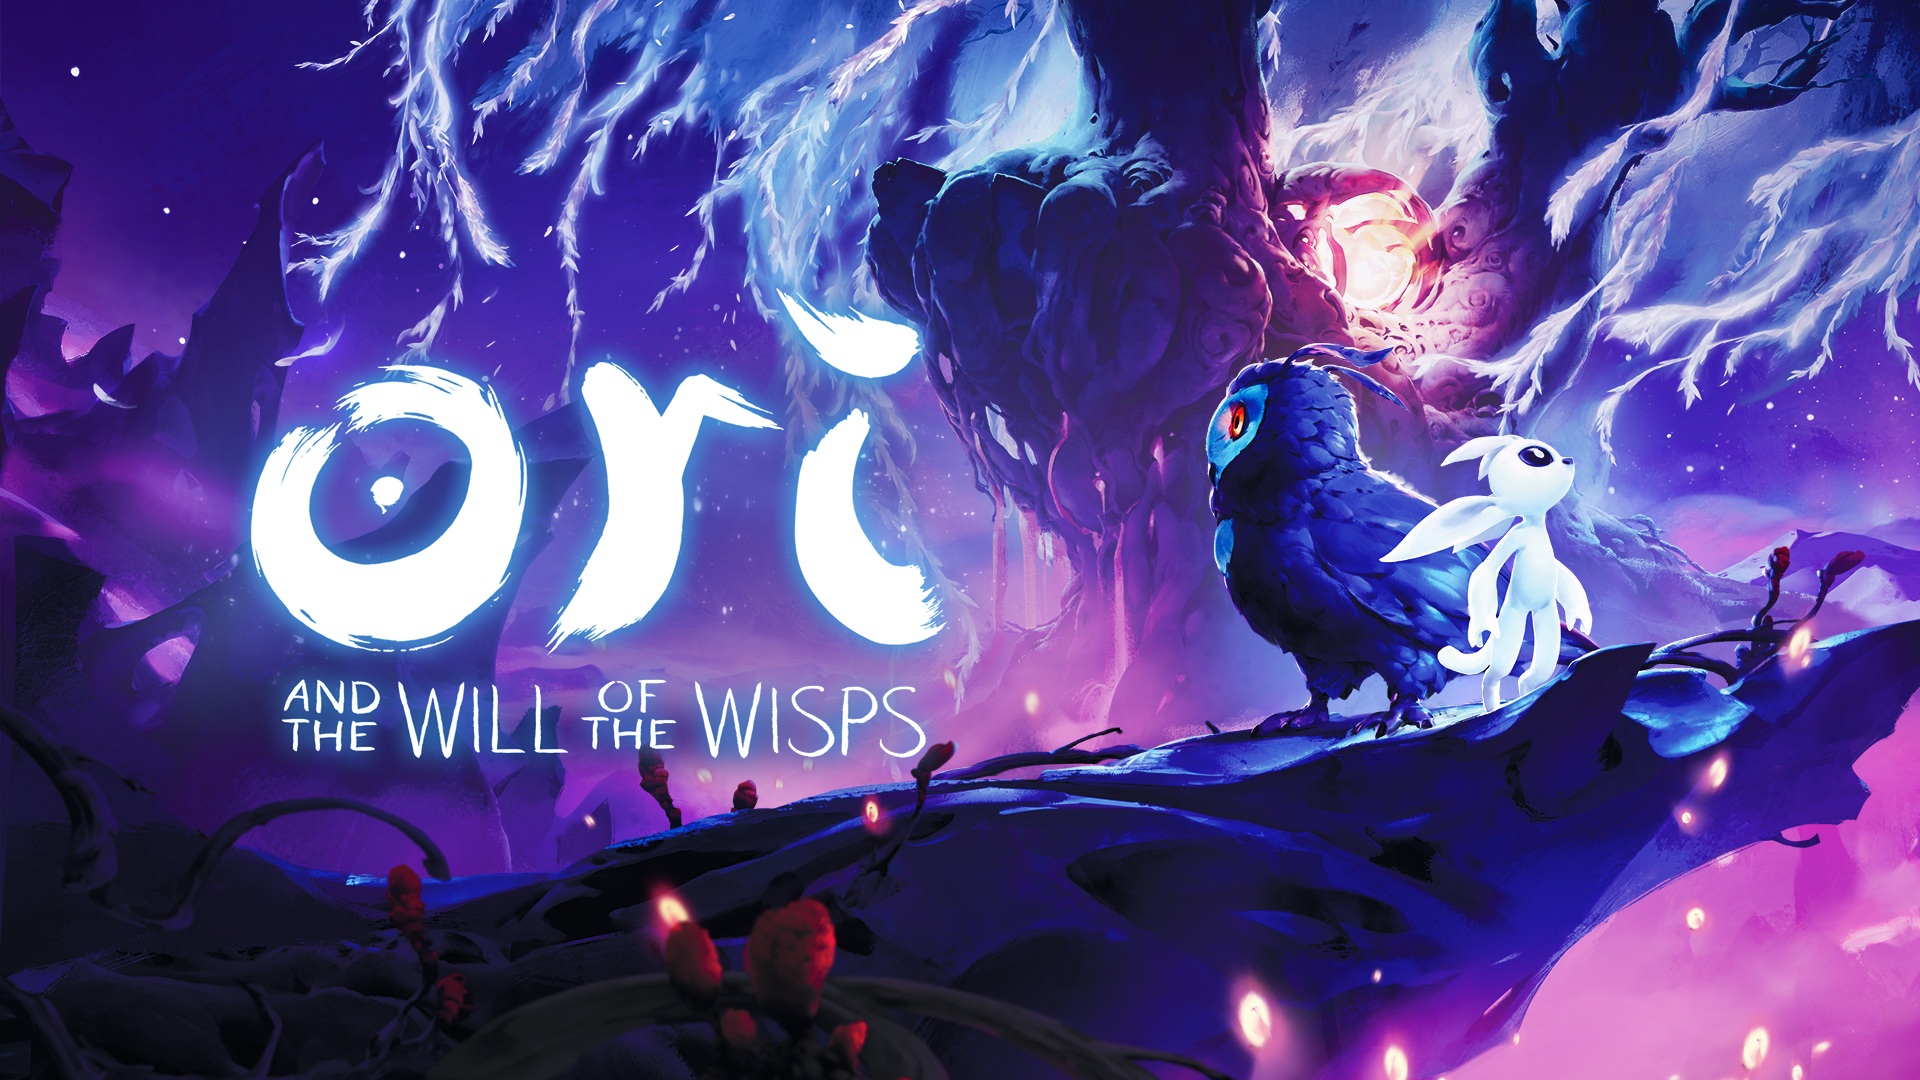 the best Platformers Ranked  - Ori And The Willow of The Wisps